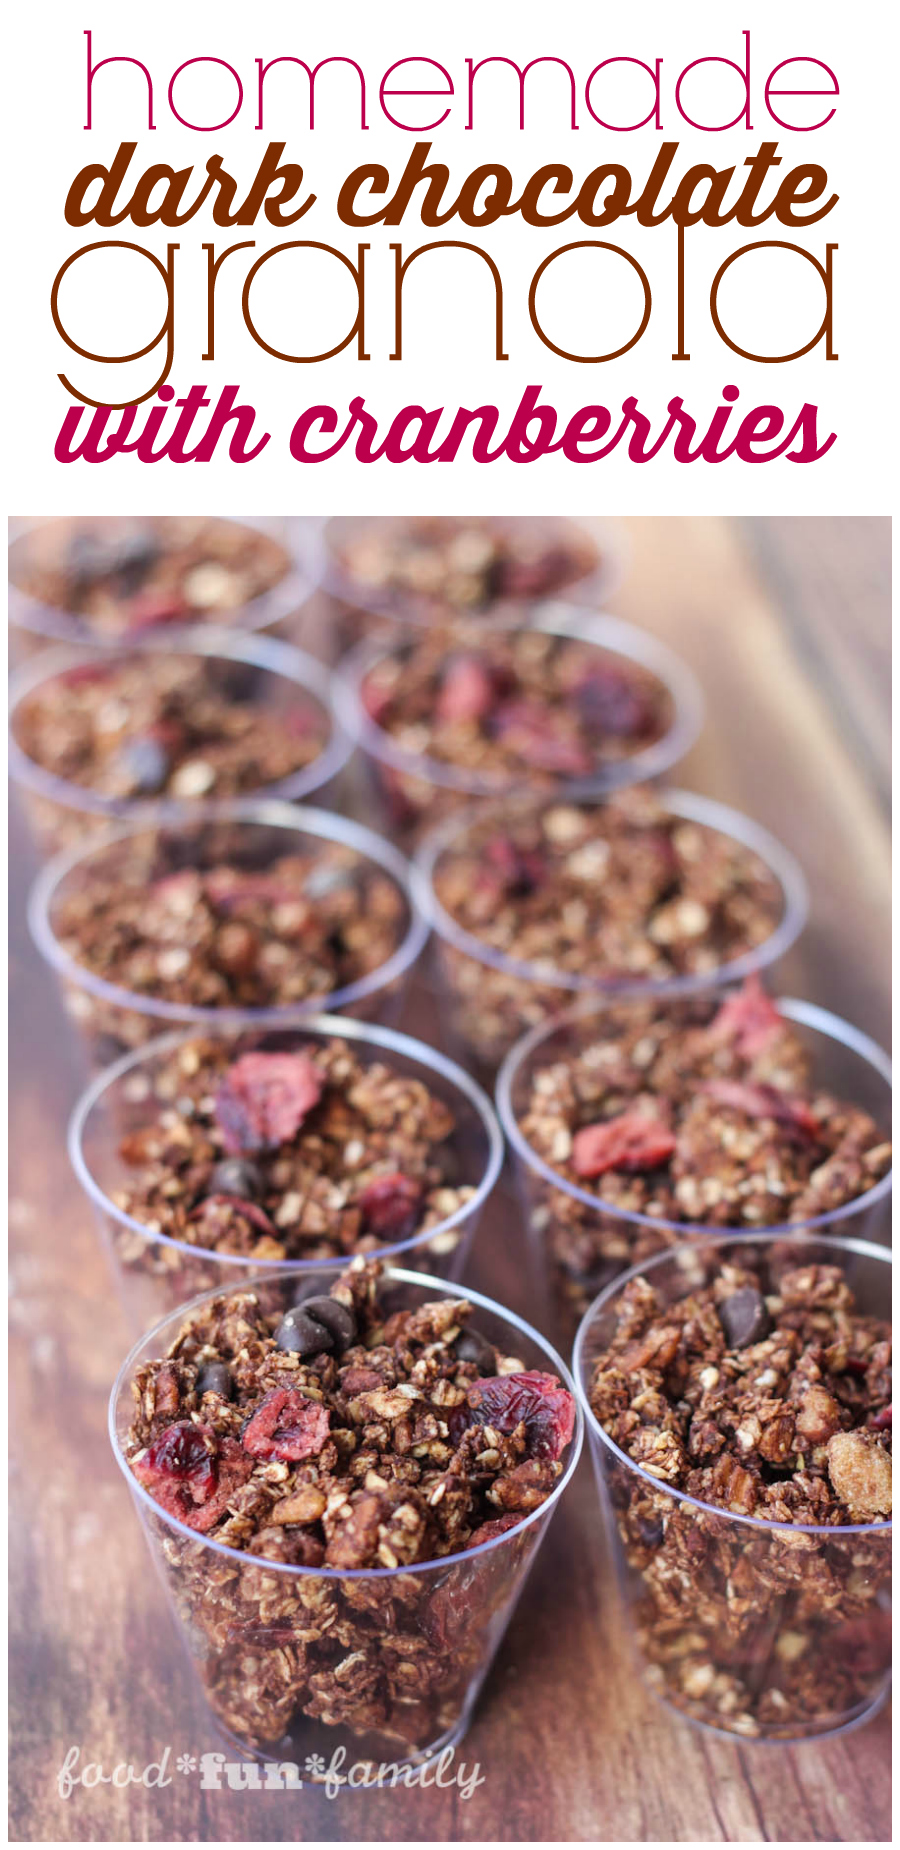 Homemade Dark Chocolate Granola with Cranberries recipe from Food Fun Family